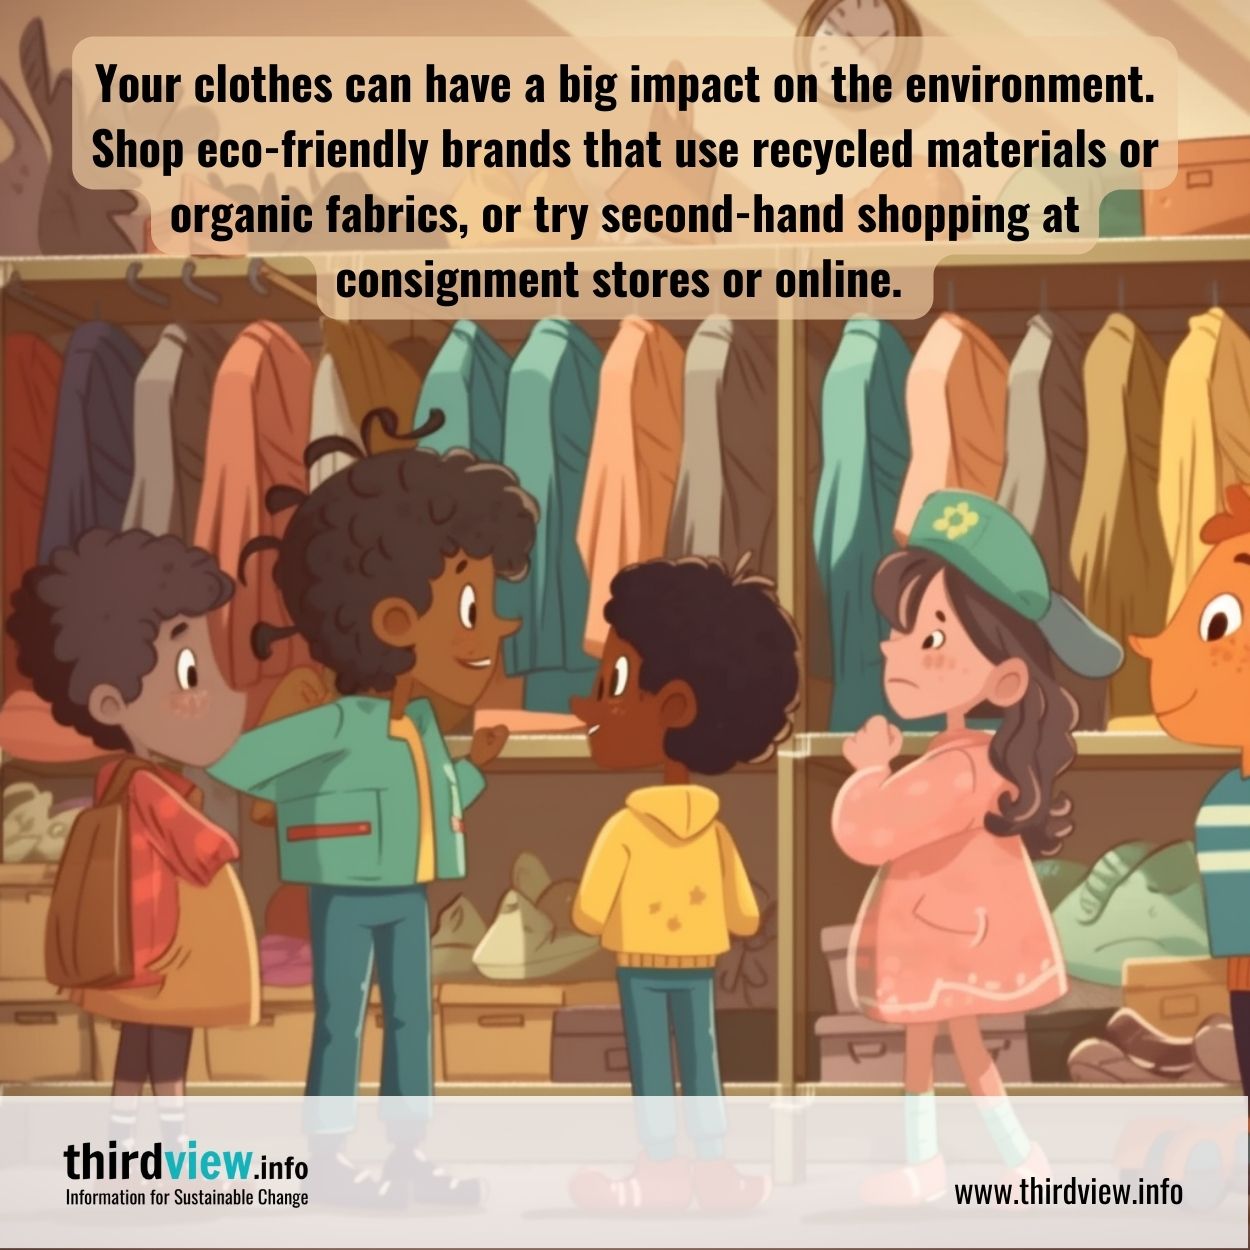 Sustainability Meets Style: Curating an Eco-Friendly Wardrobe - thirdview